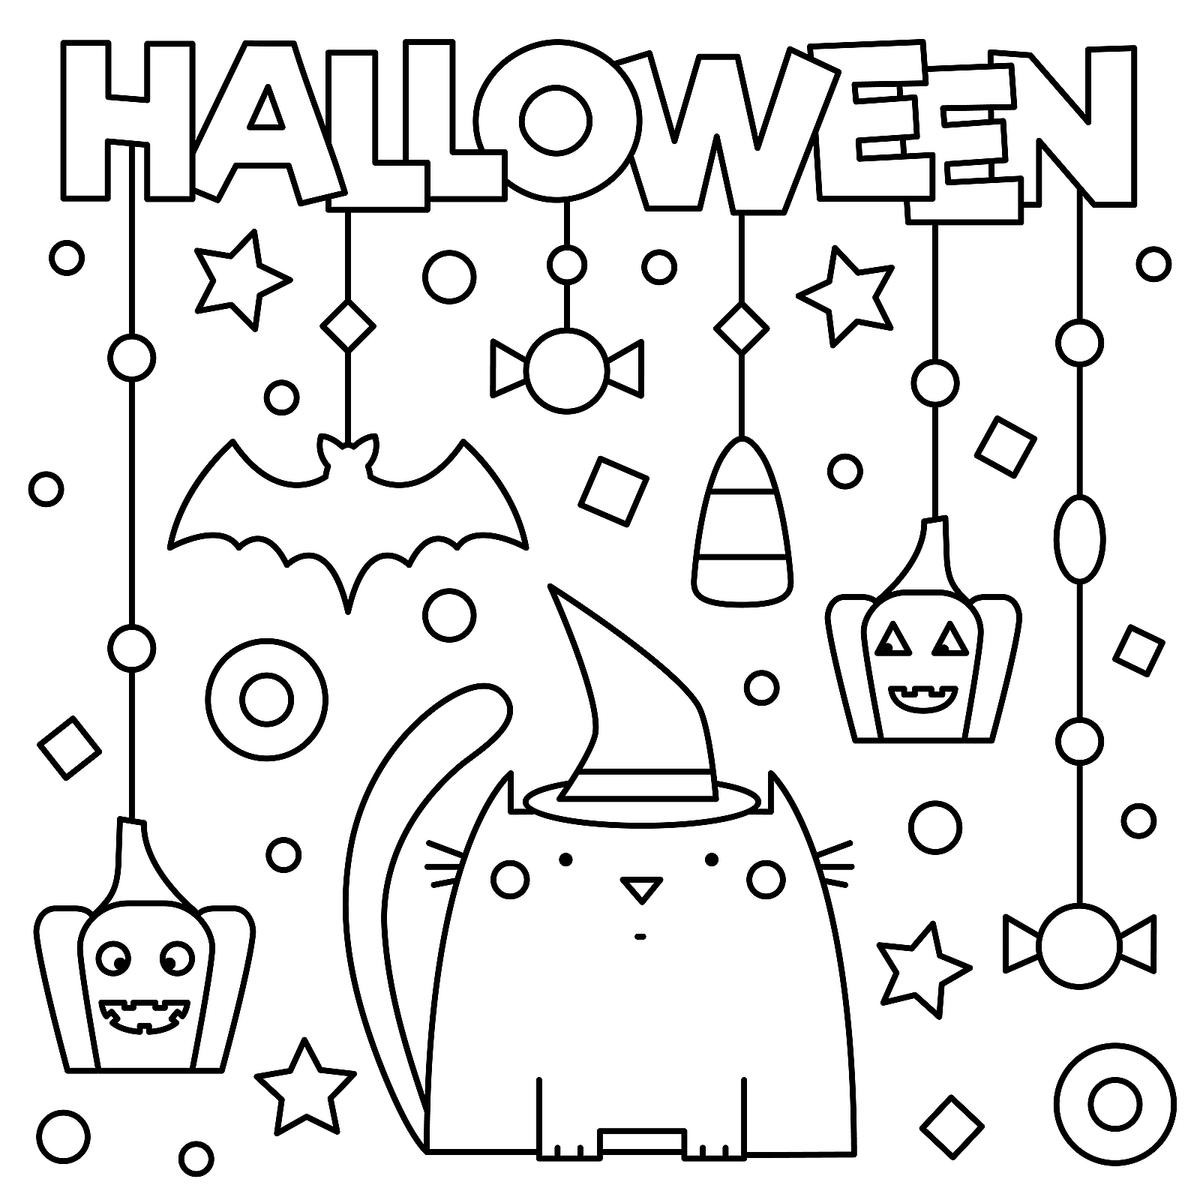 Halloween Coloring Books For Kids
 Halloween Coloring Pages 10 Free Spooky Printable